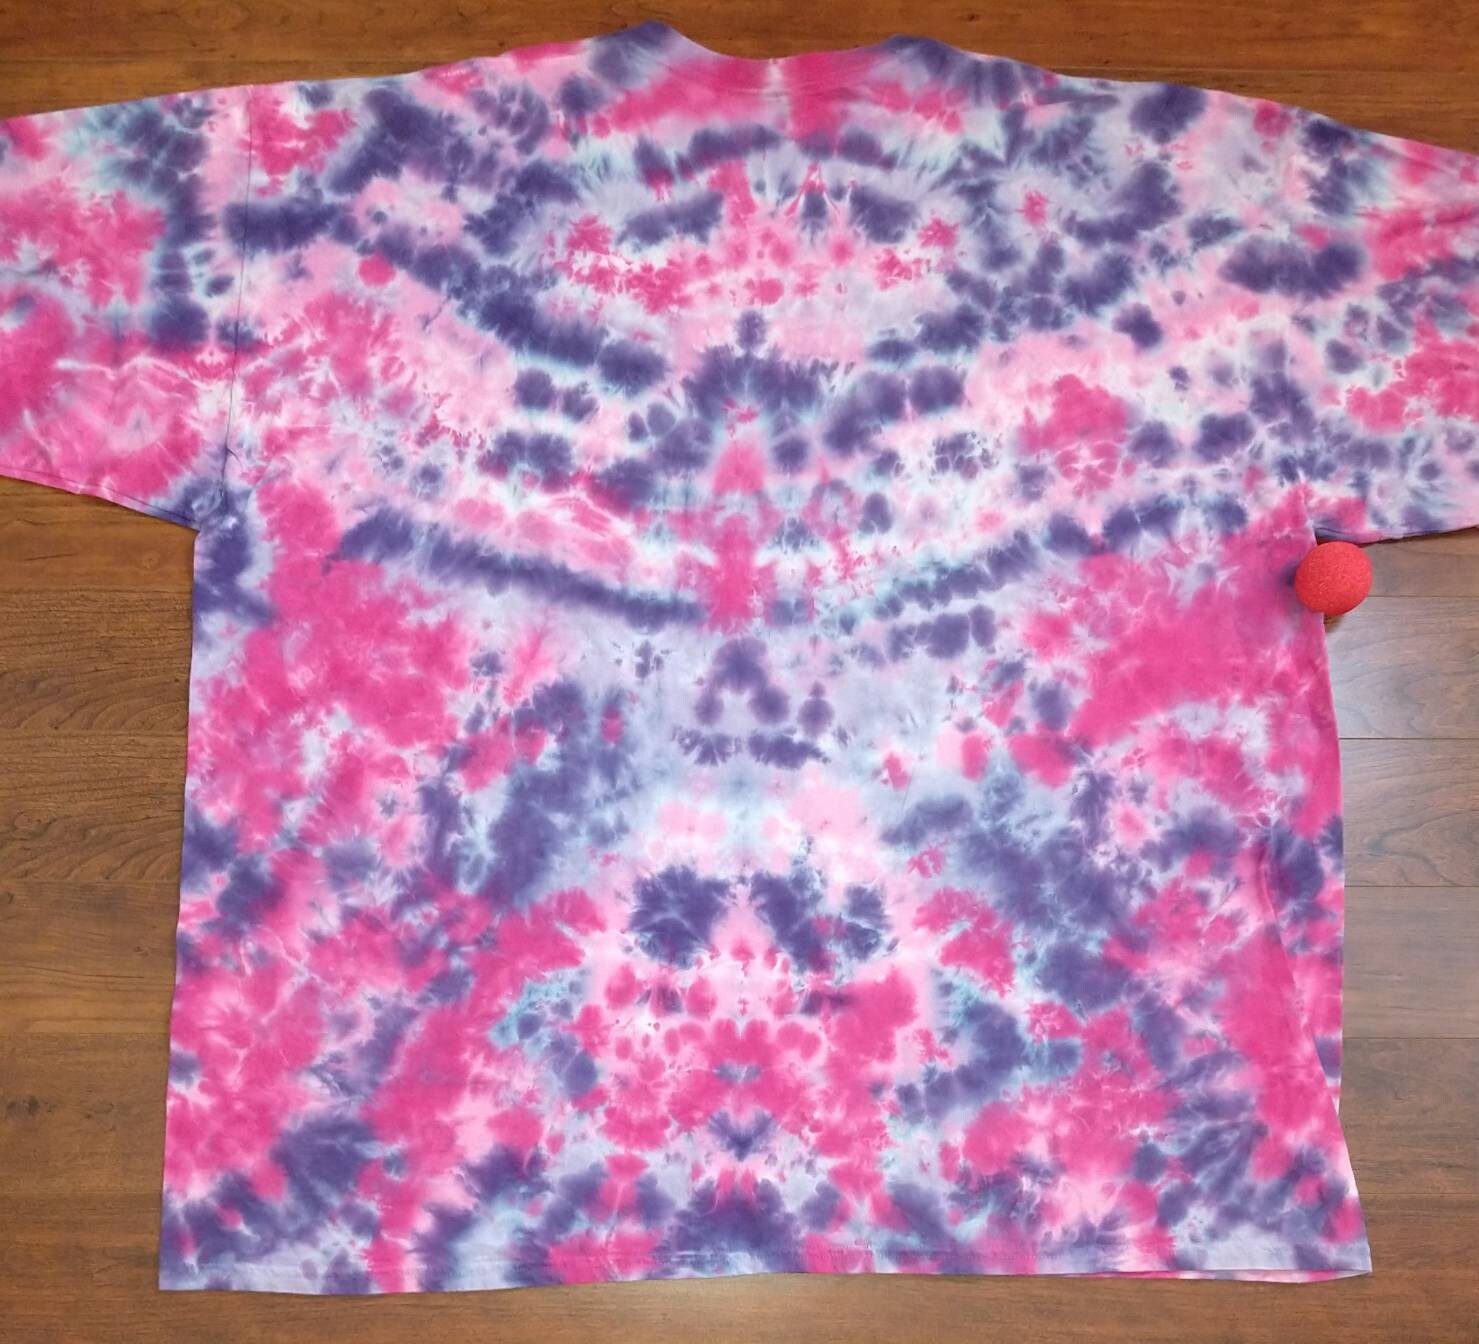 5XL pink and purple tie-dye shirt 20036 | Etsy